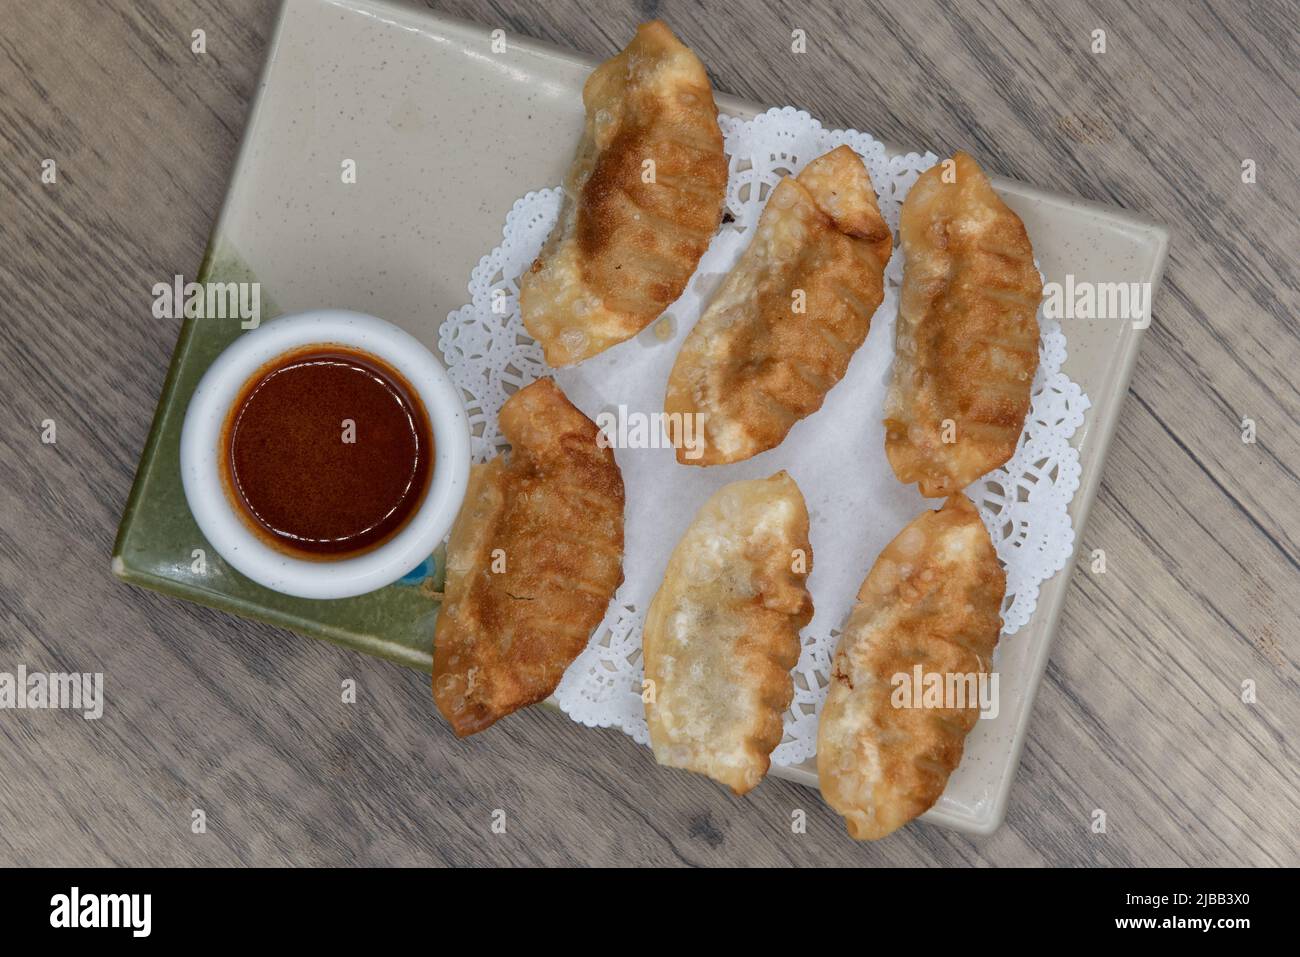 Overhead view of Asian cuisine deep fried crunchy gyoza with dipping sauce for a very hearty appetizer. Stock Photo